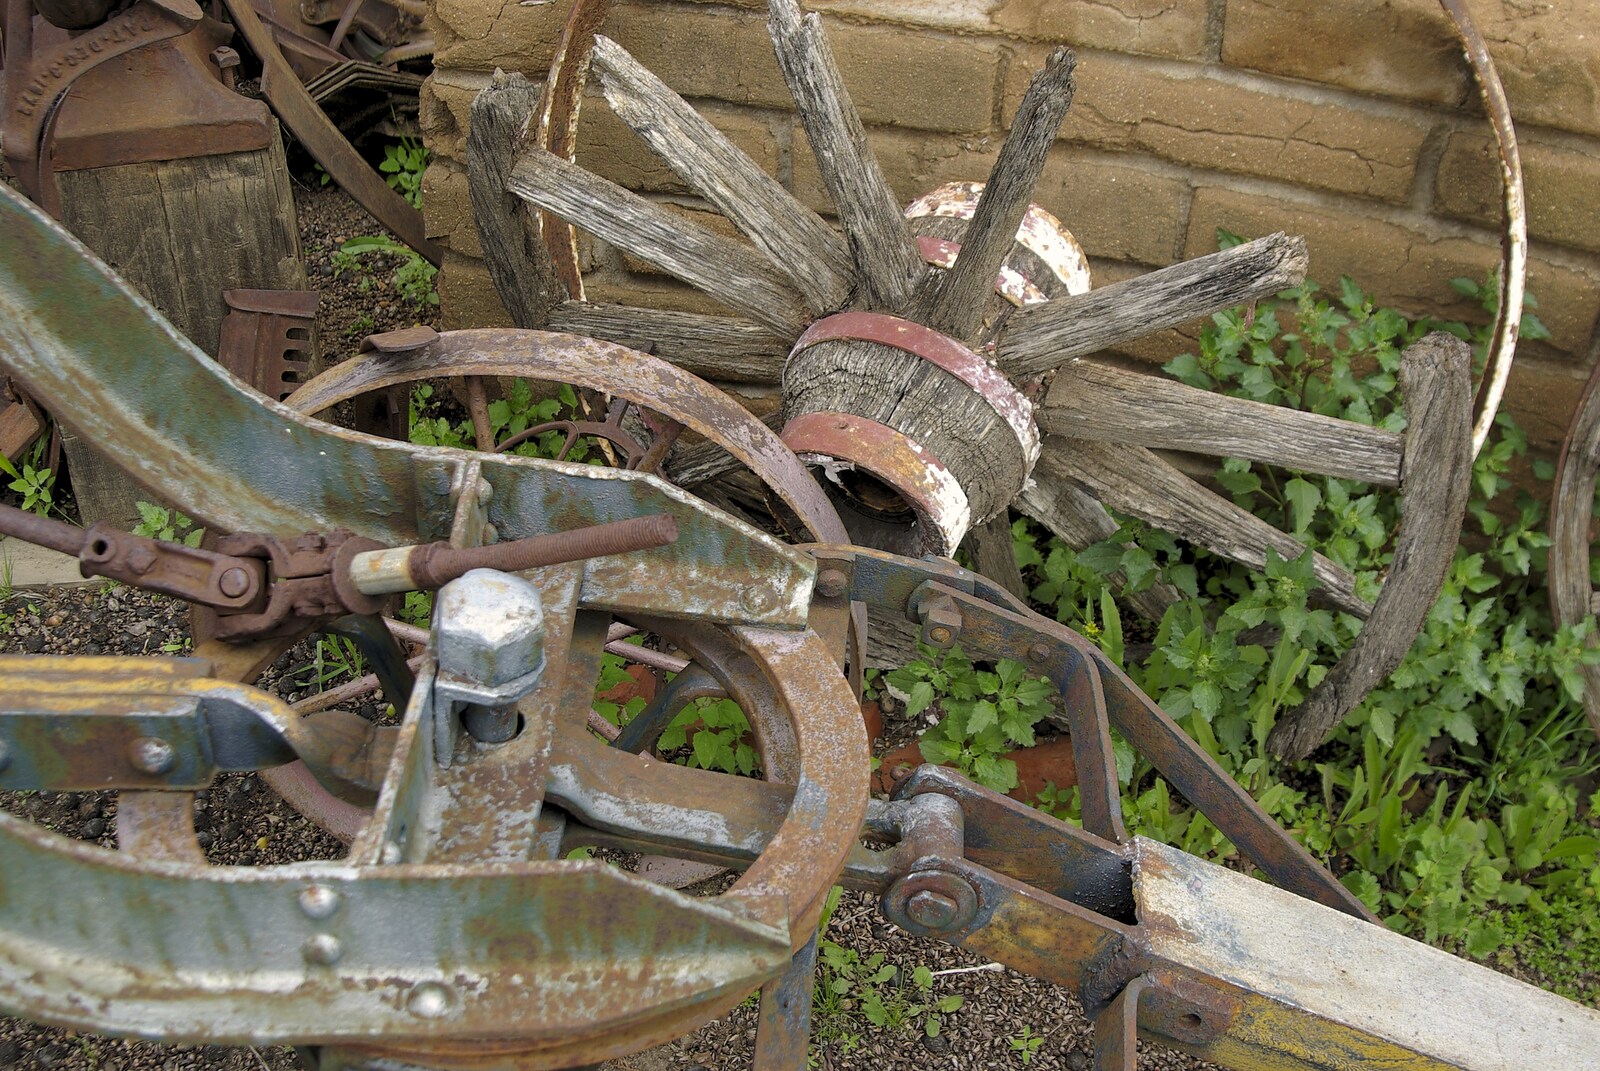 A broken cart wheel from San Diego 8: The Beaches of Torrey Pines, and Ramona, California, USA - 29th February 2008